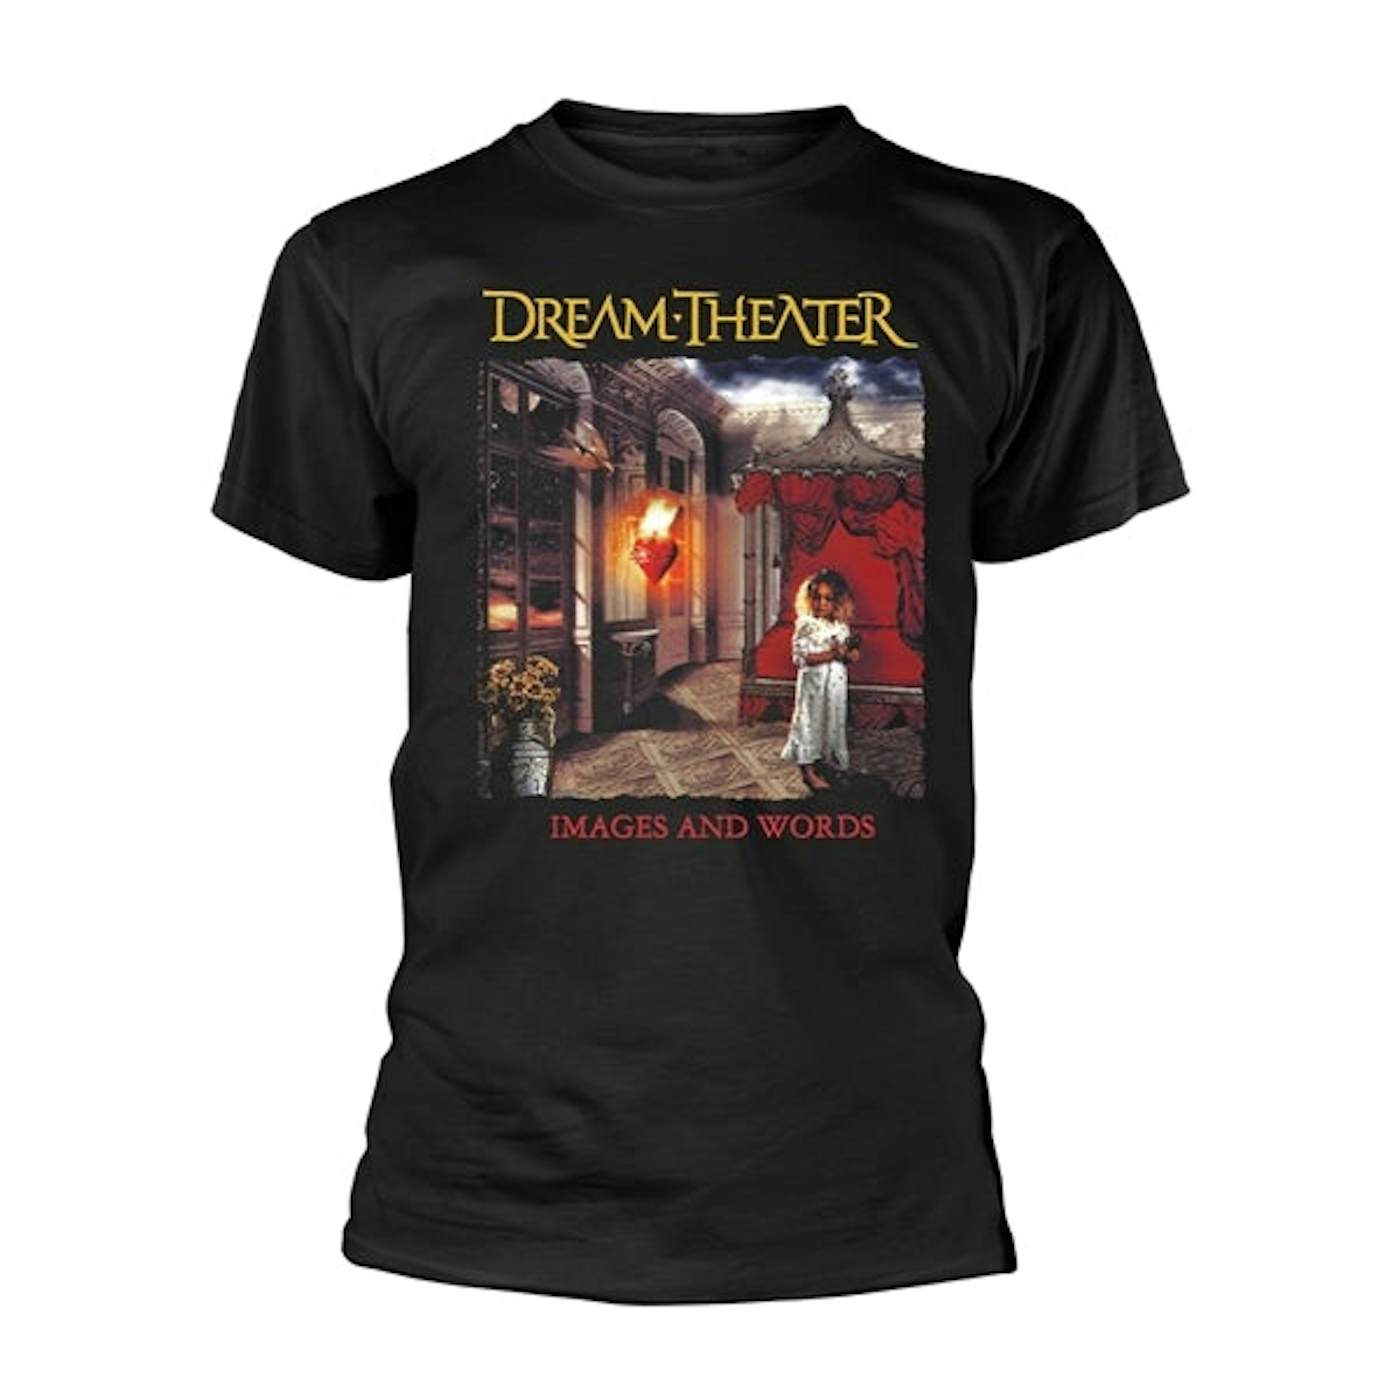 Dream Theater T Shirt - Images And Words